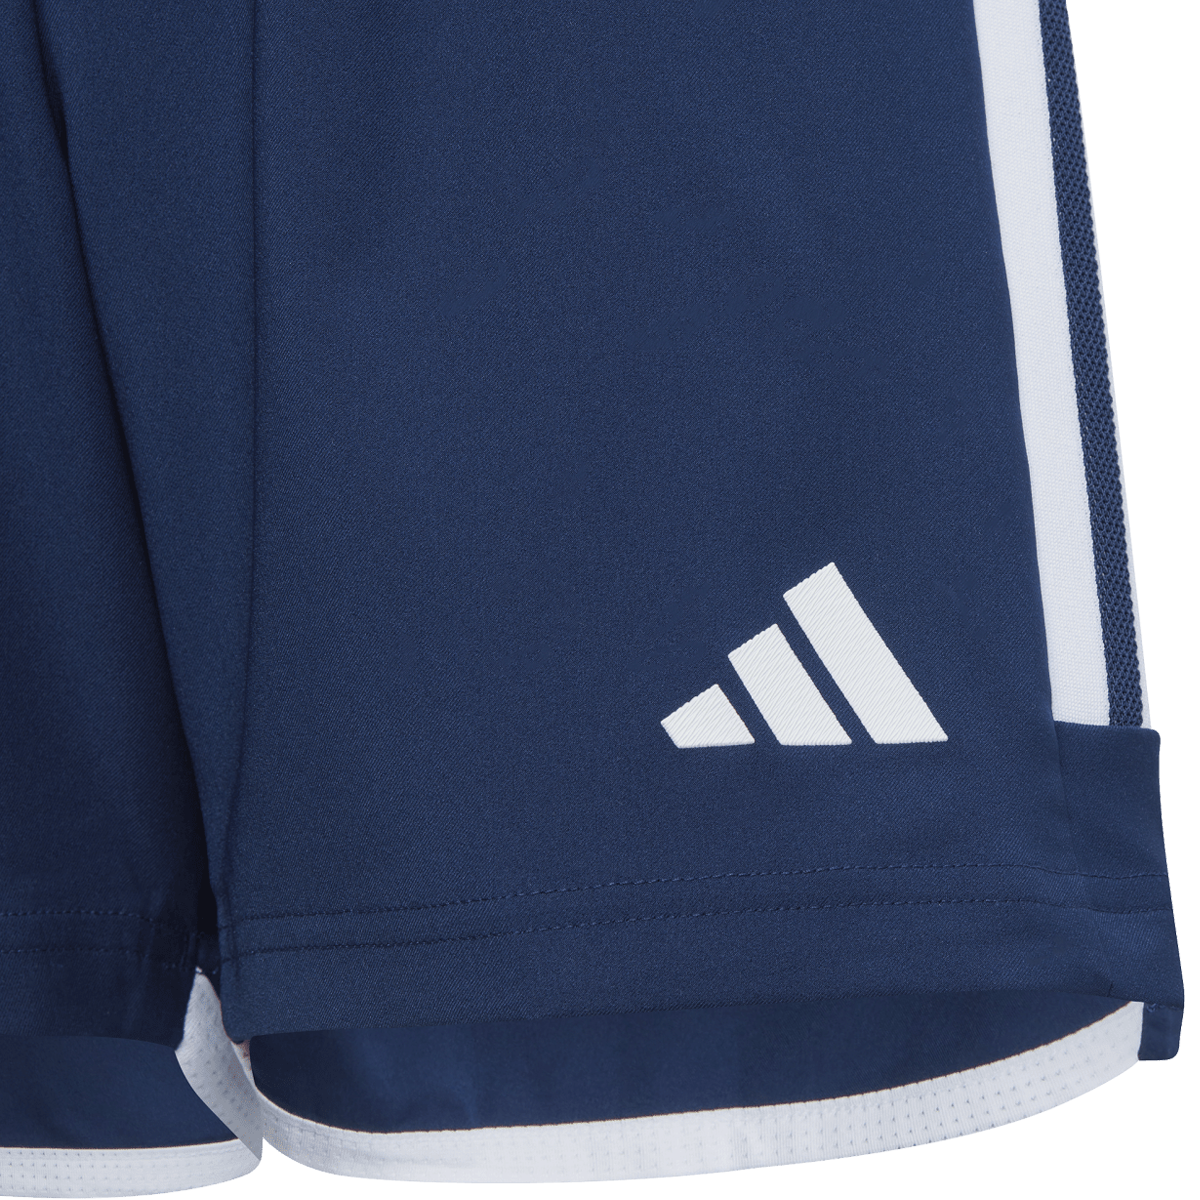 Youth Tiro 23 Competition Match Short alternate view